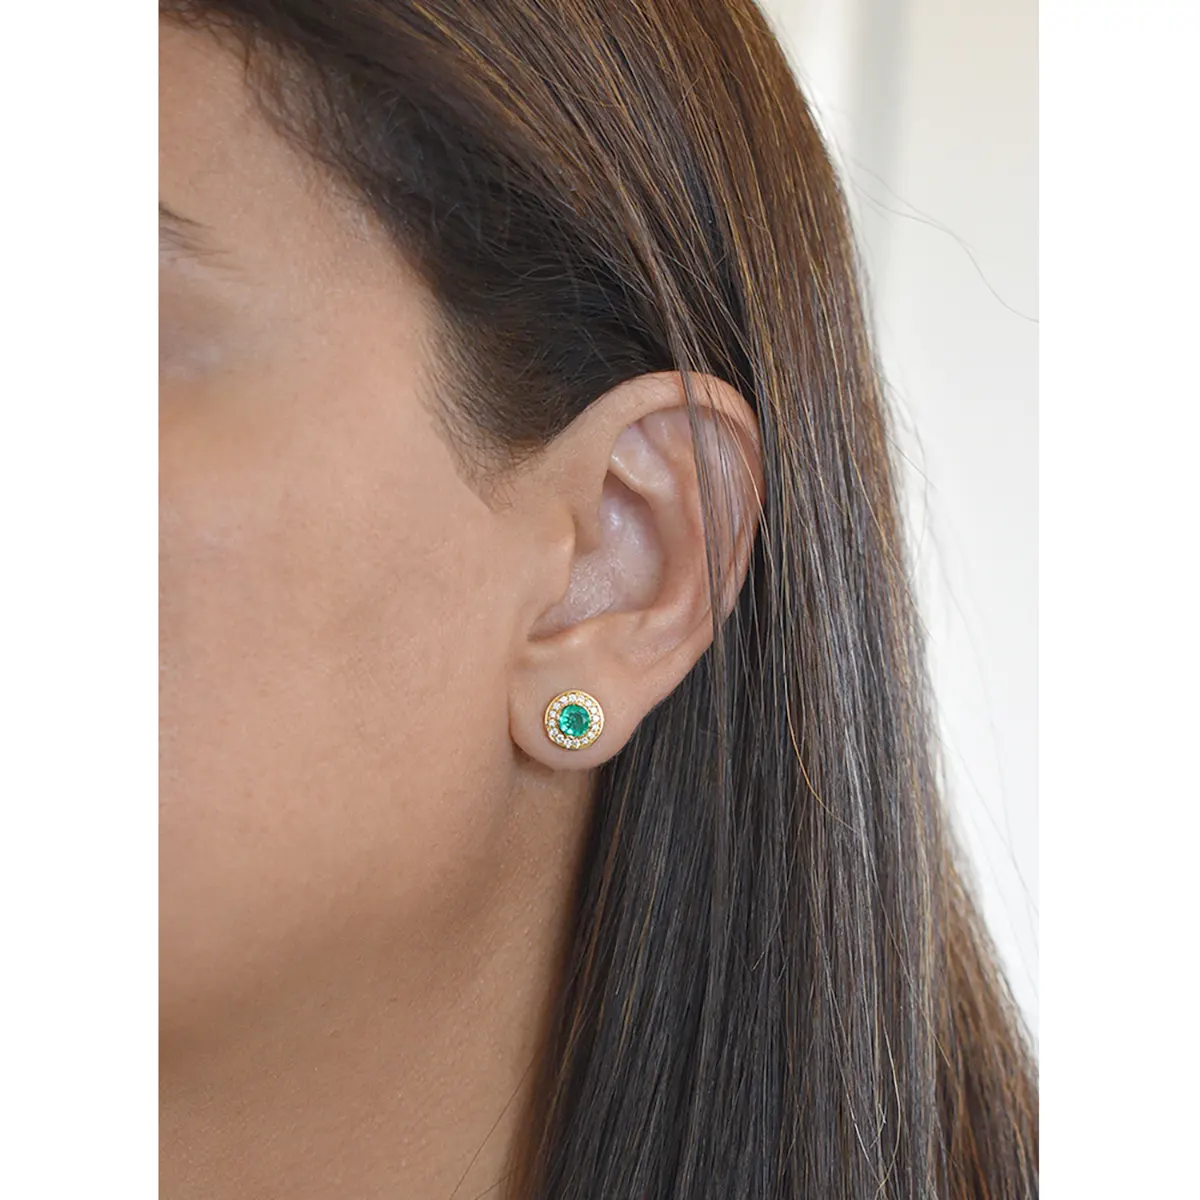 Green crystals circular studs earrings with real emeralds and diamonds in 18K yellow gold